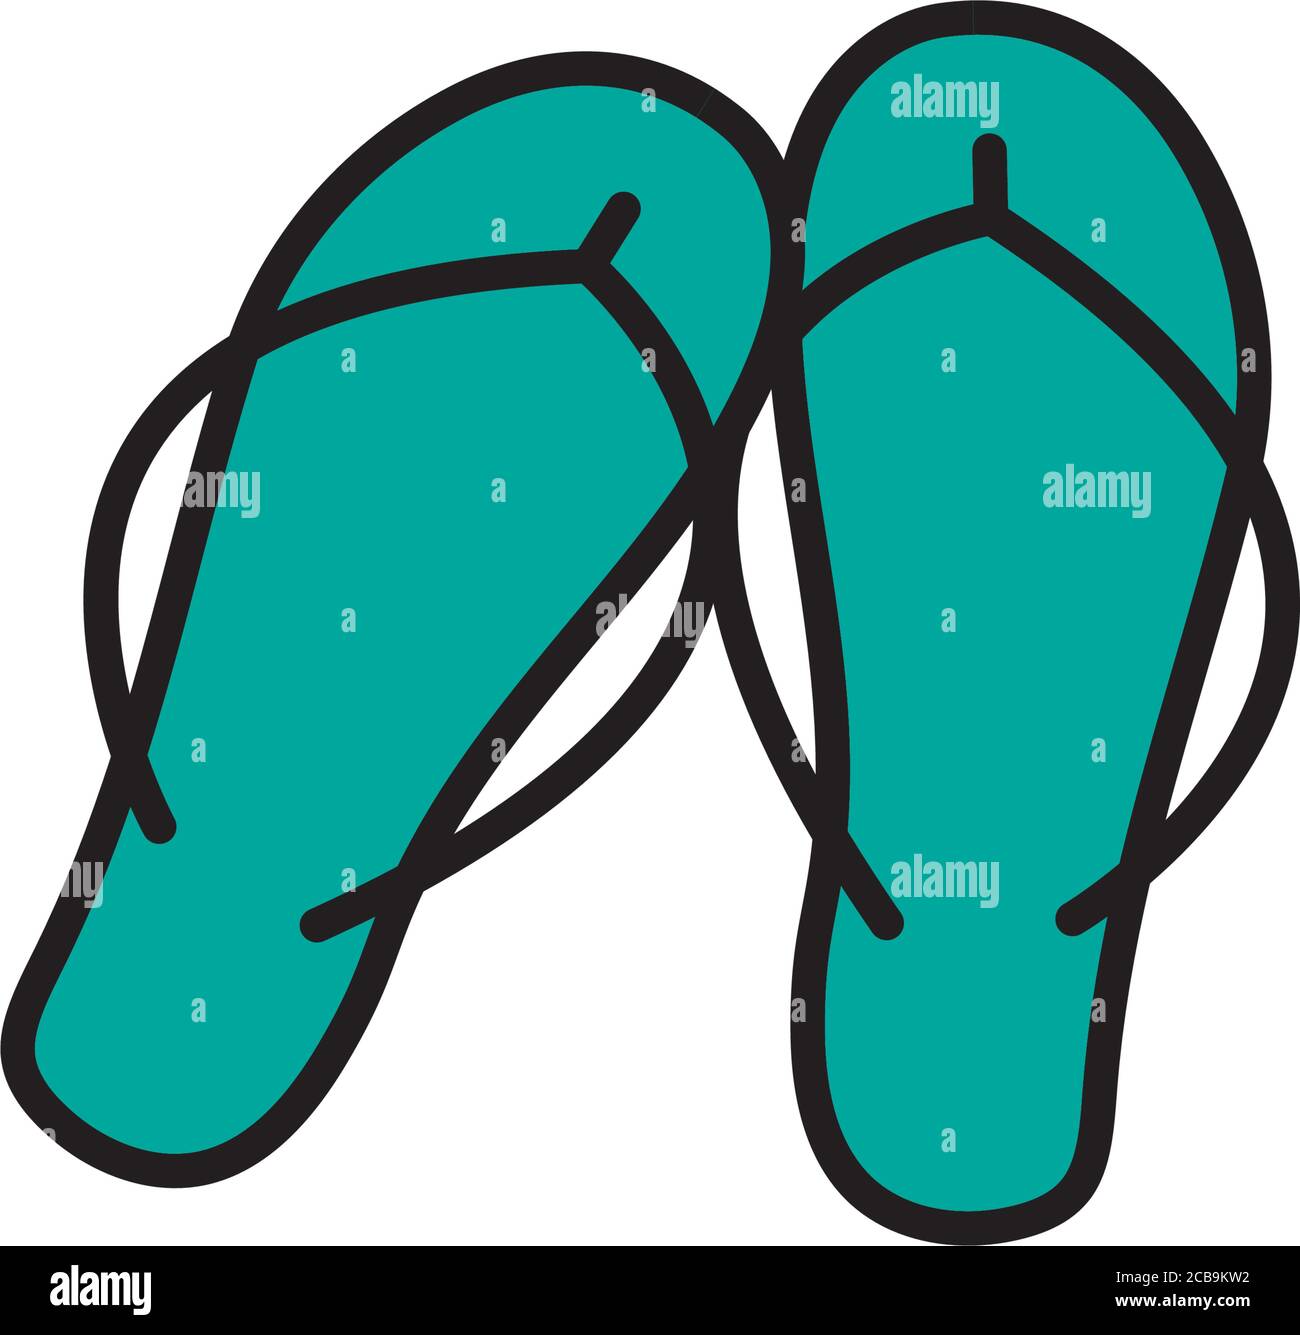 Flip flop icon design template vector isolated illustration Stock ...